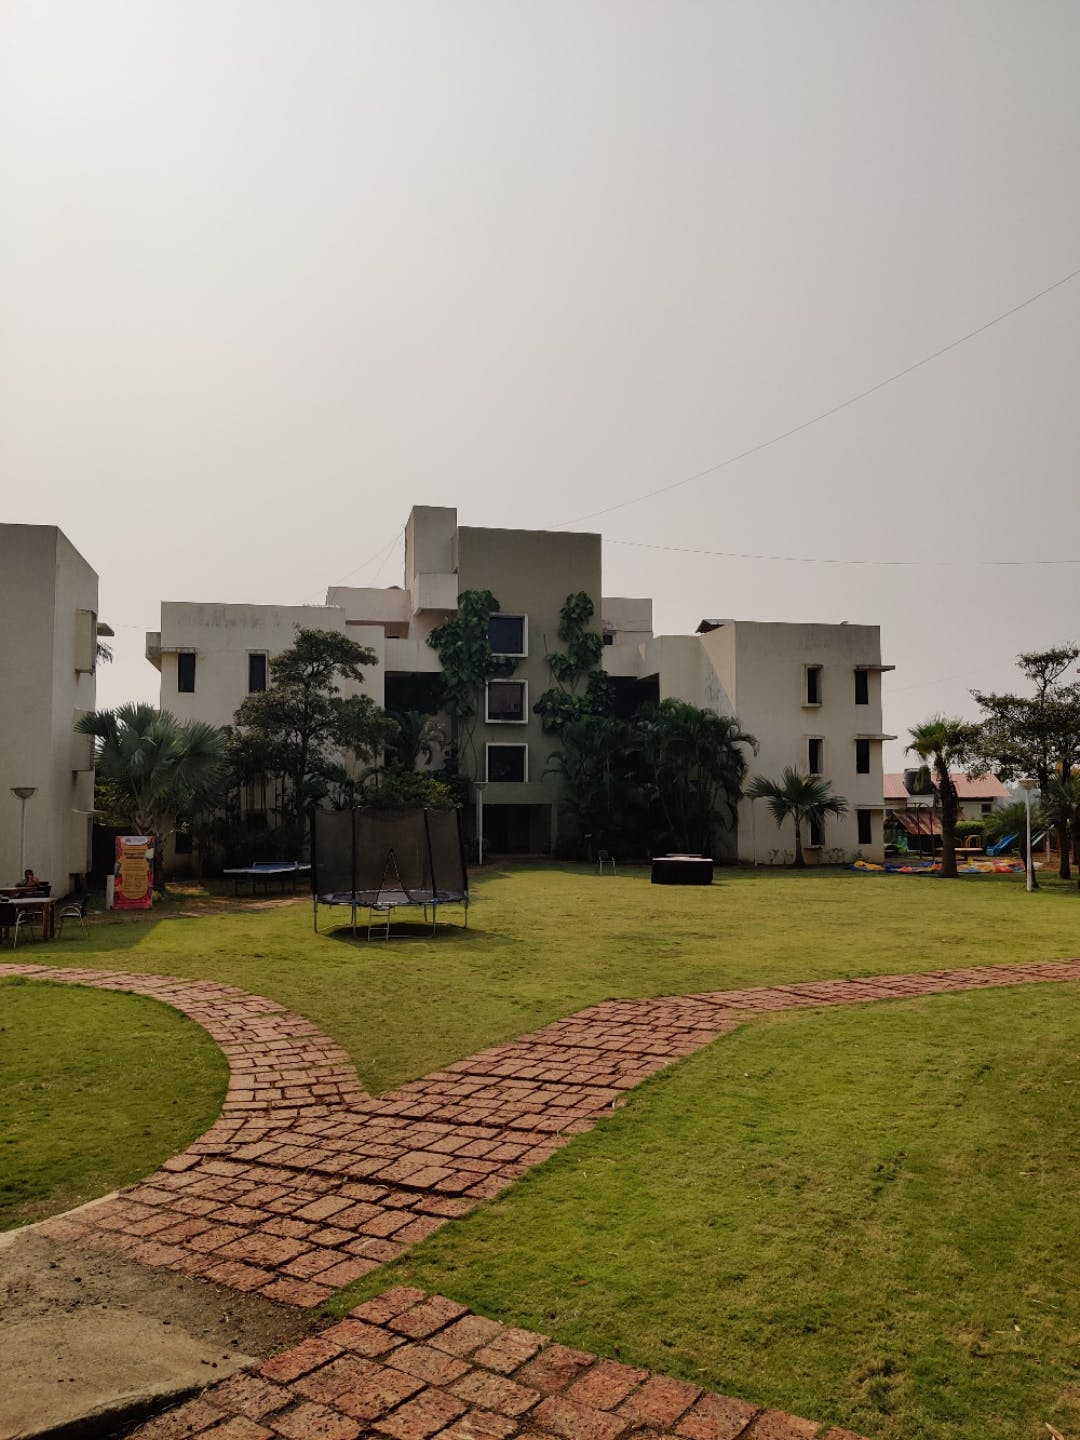 Residential area,Architecture,Property,Grass,Building,House,Home,Neighbourhood,Tree,Urban area